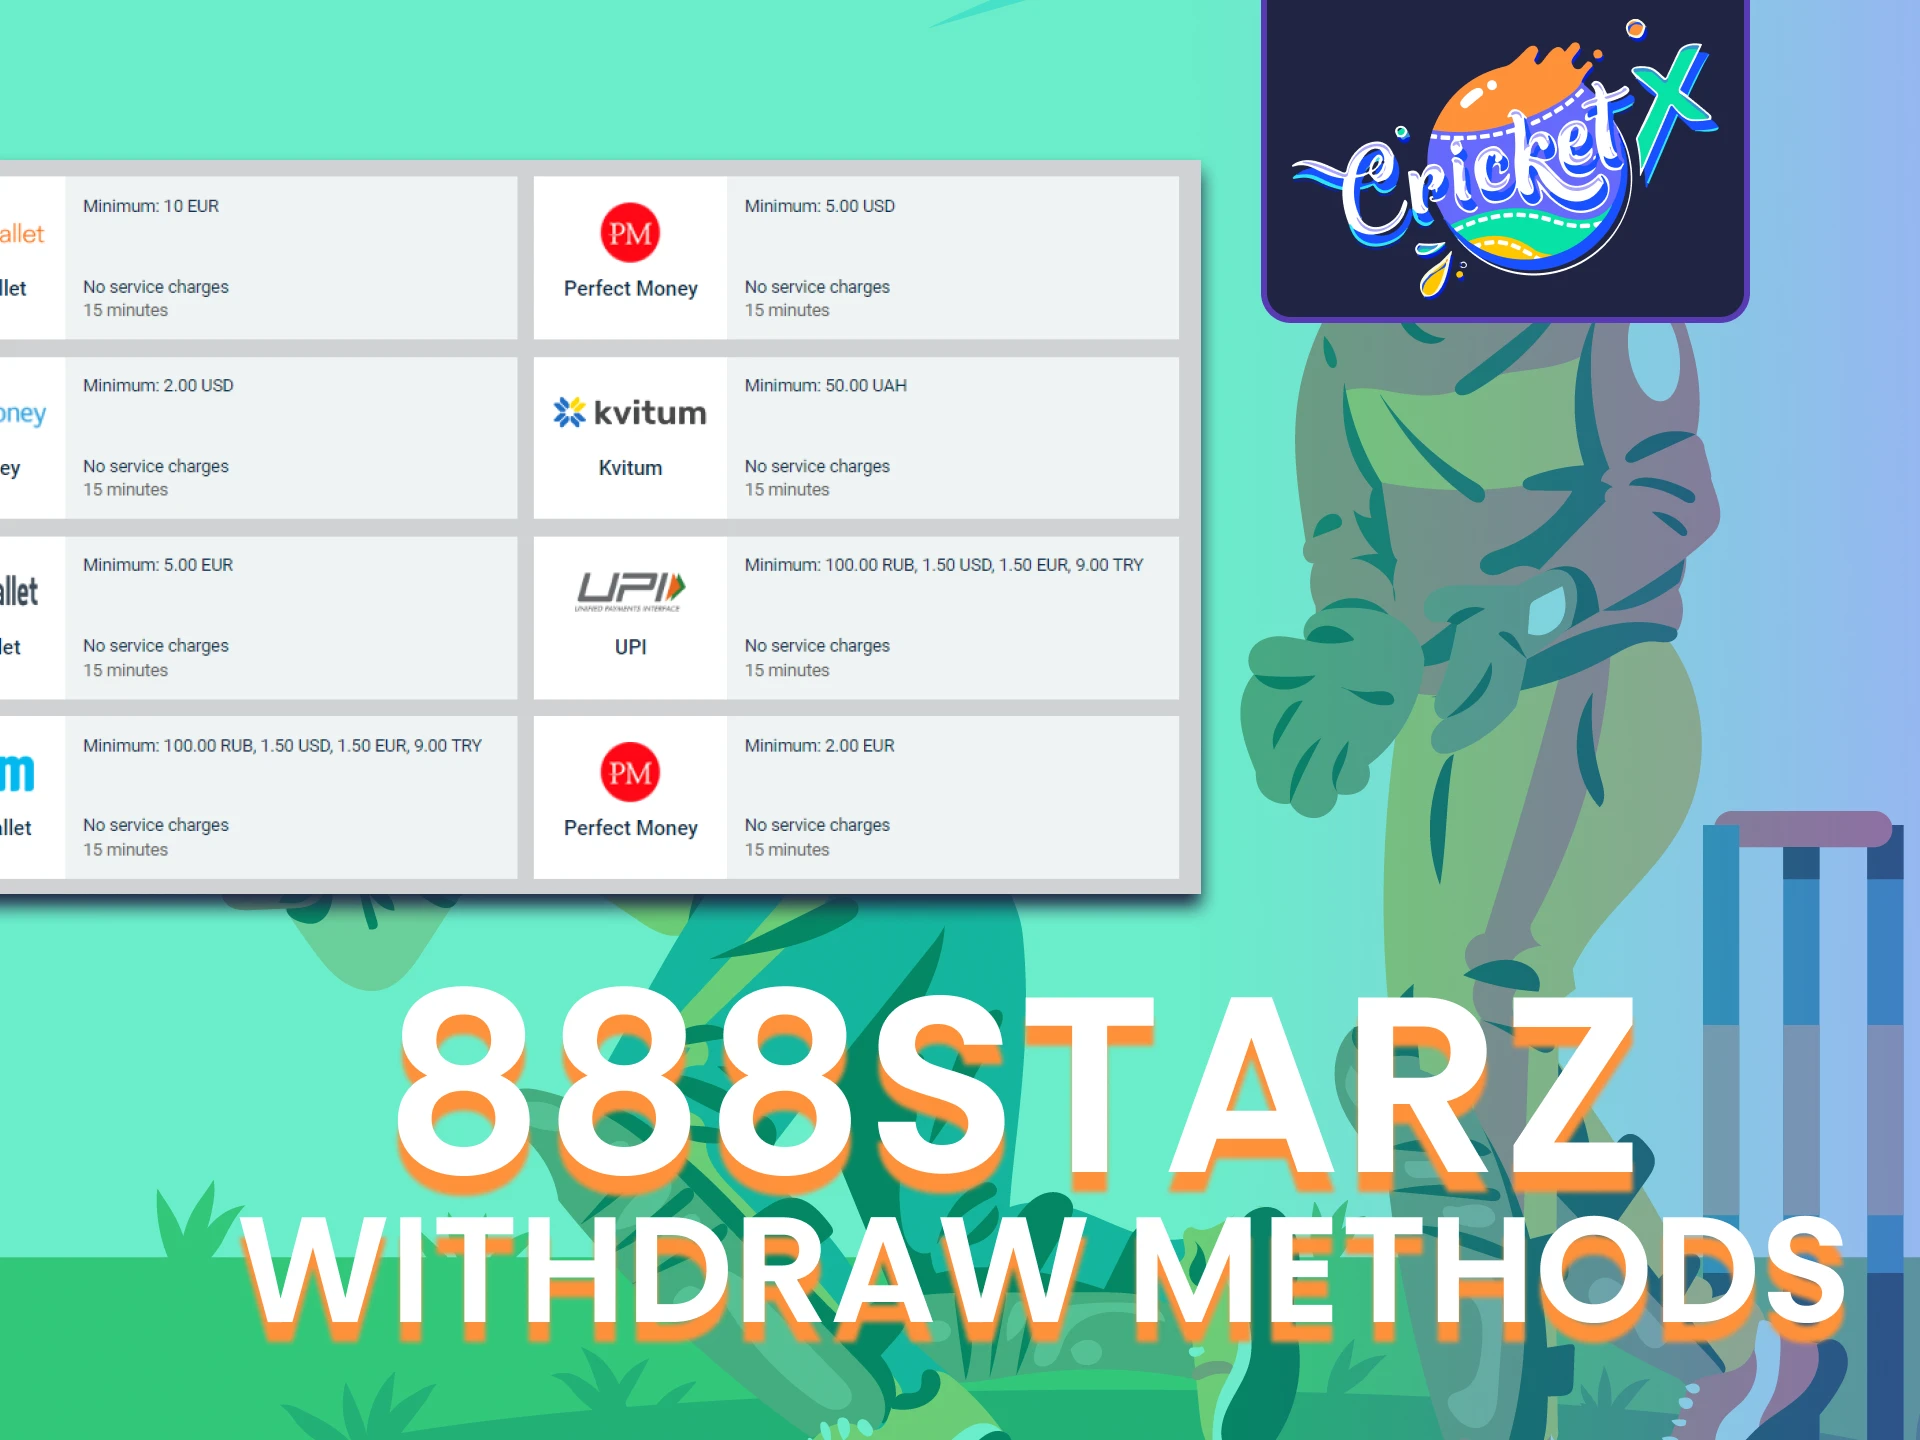 We will tell you about withdrawal methods on the 888starz website.